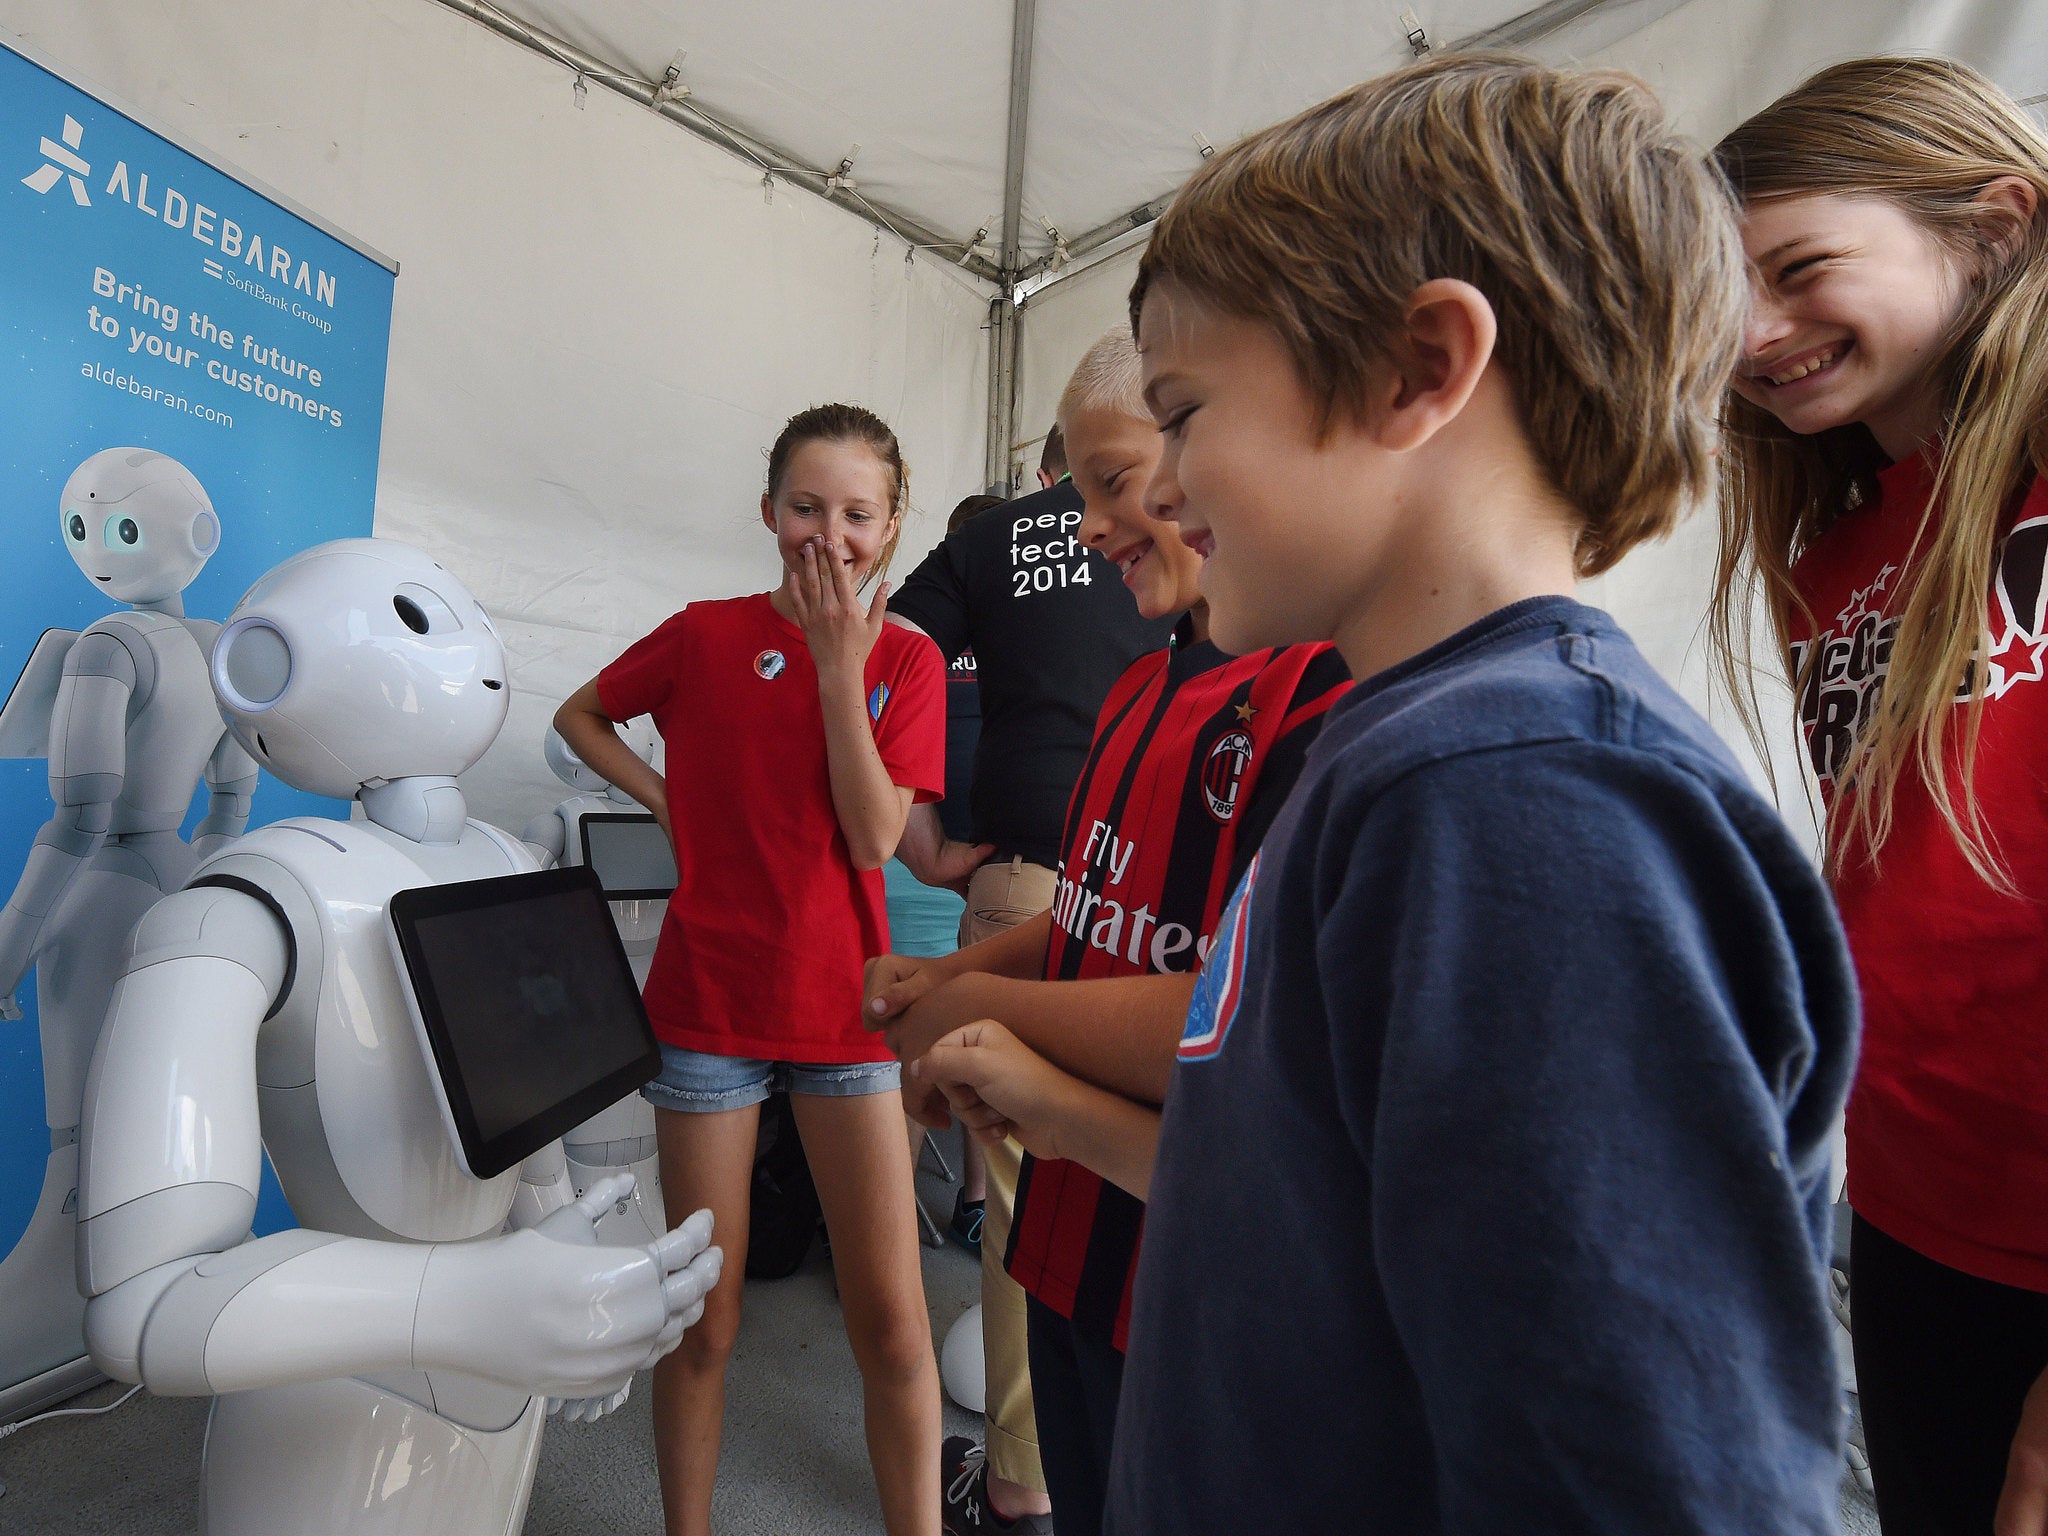 Could these childrens' dream jobs be replaced by robots?